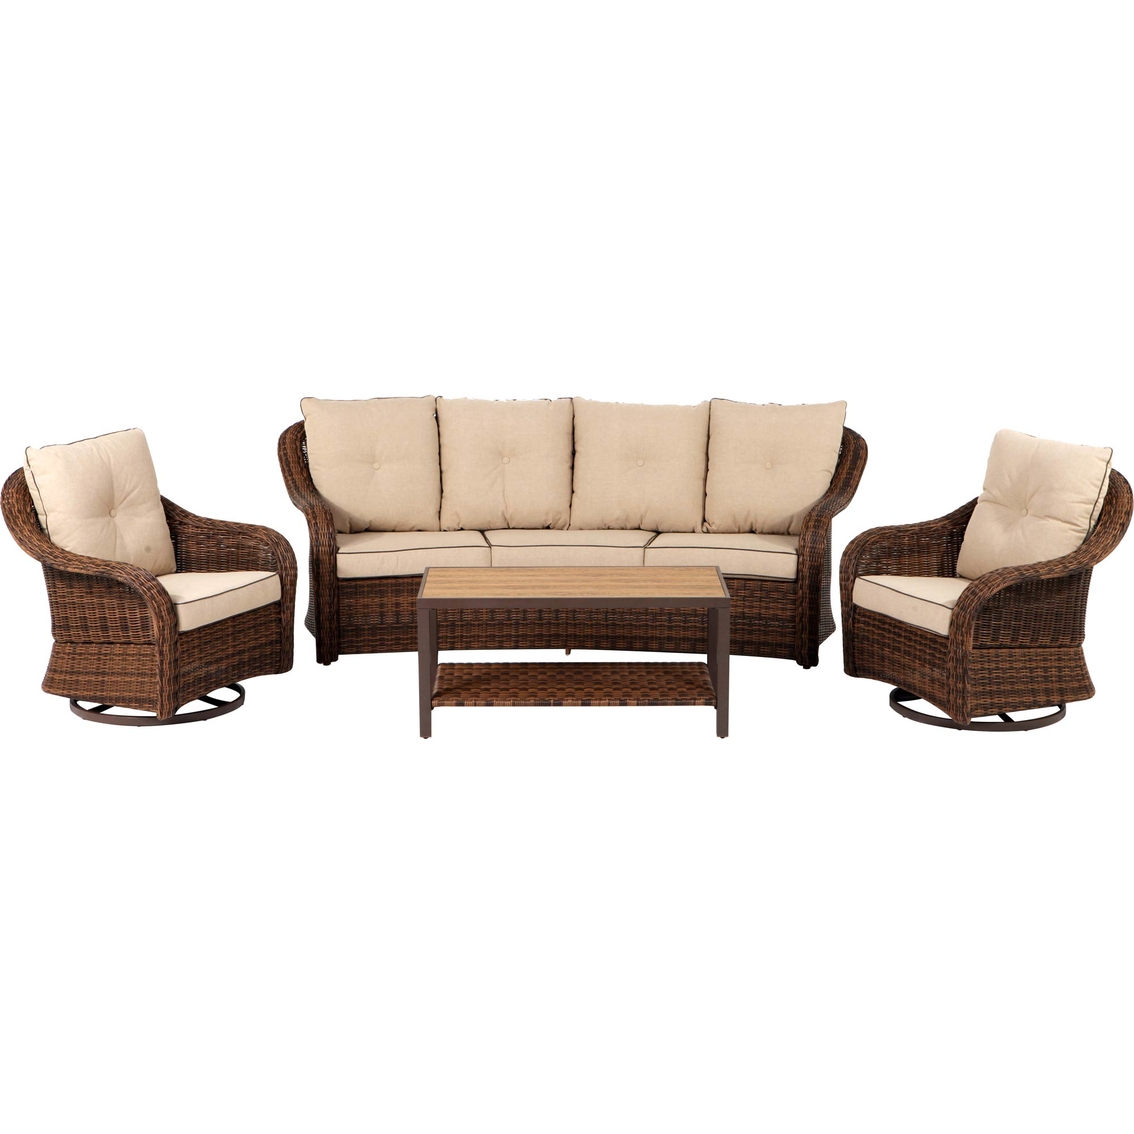 Grand Leisure Palermo 4 Pc Deep Seating Set Tables Chairs